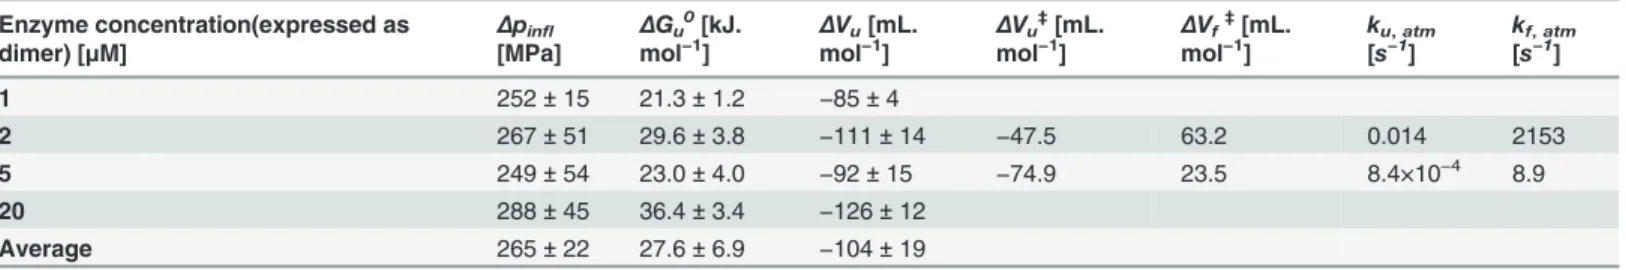 Table 1. Equilibrium properties of monomer unfolding indicated by intensity of the tryptophan ﬂ uorescence spectrum.